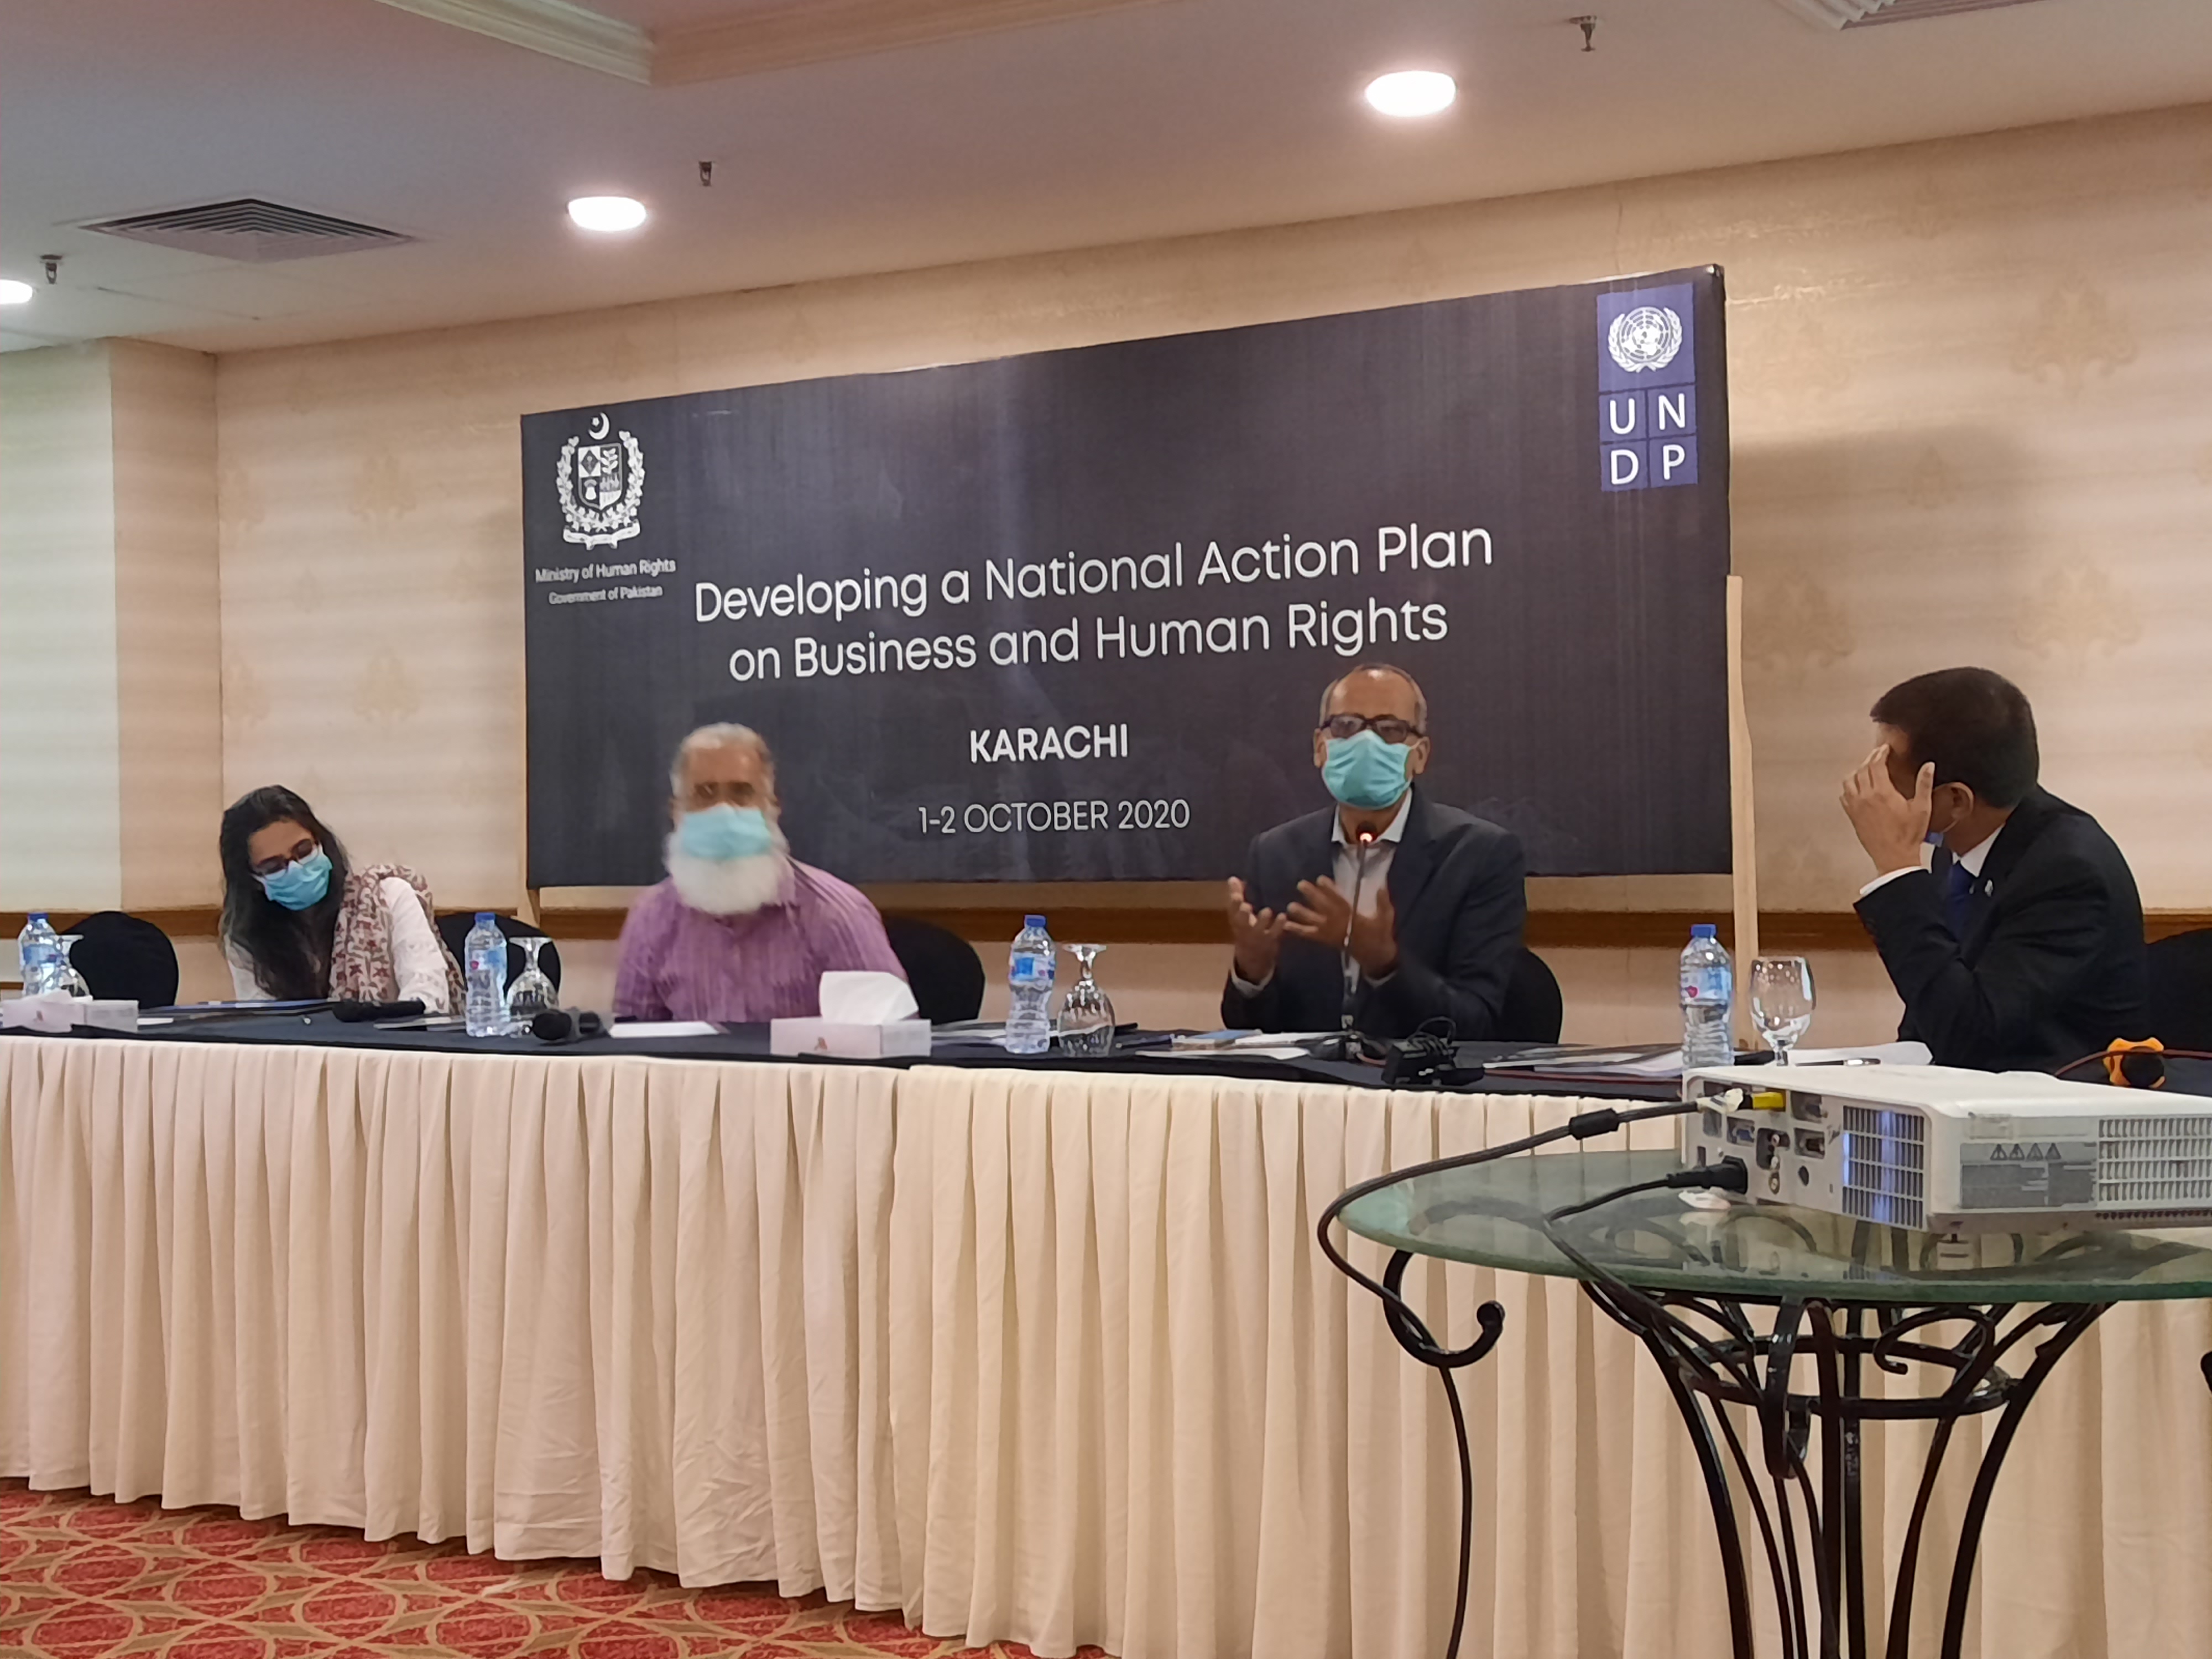 Developing a National Action Plan on Business and Human Rights